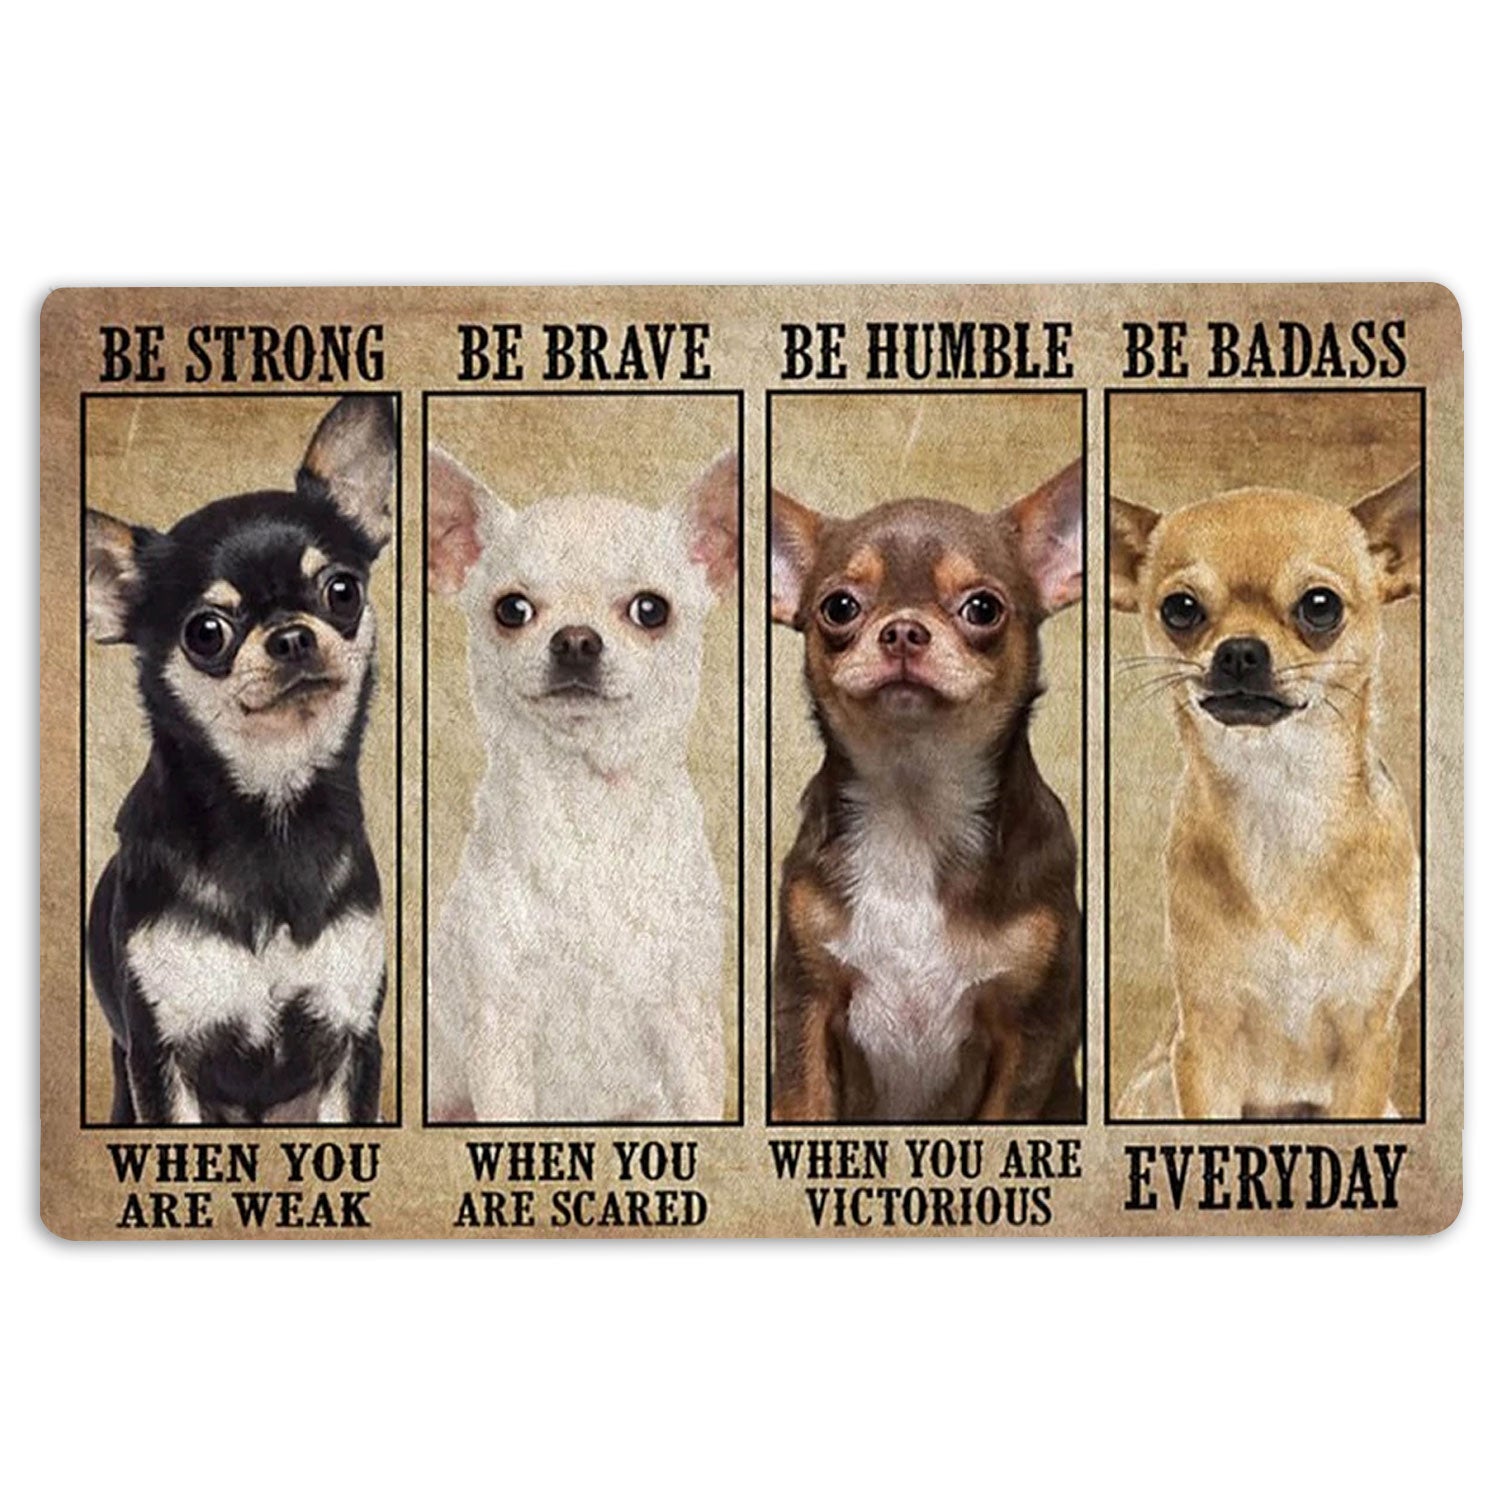 Ohaprints-Doormat-Outdoor-Indoor-Be-Strong-Brave-Humble-Badass-Chihuahua-Dog-Gifts-For-Dog-Lovers-Rubber-Door-Mat-1324-18'' x 30''